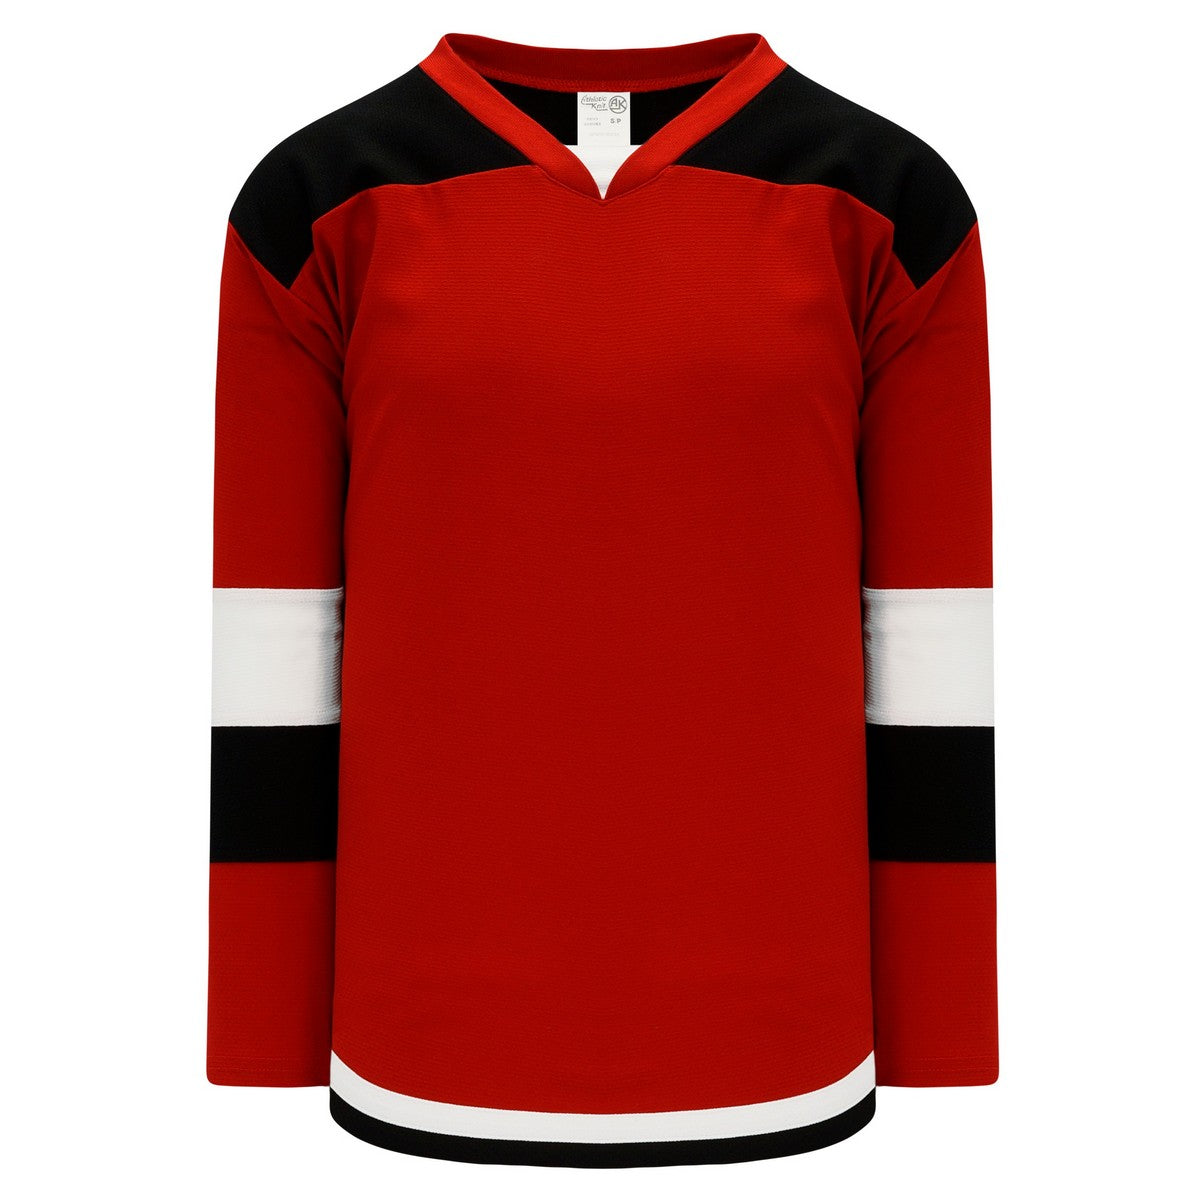 Select Series H7400 Jersey Red-Black